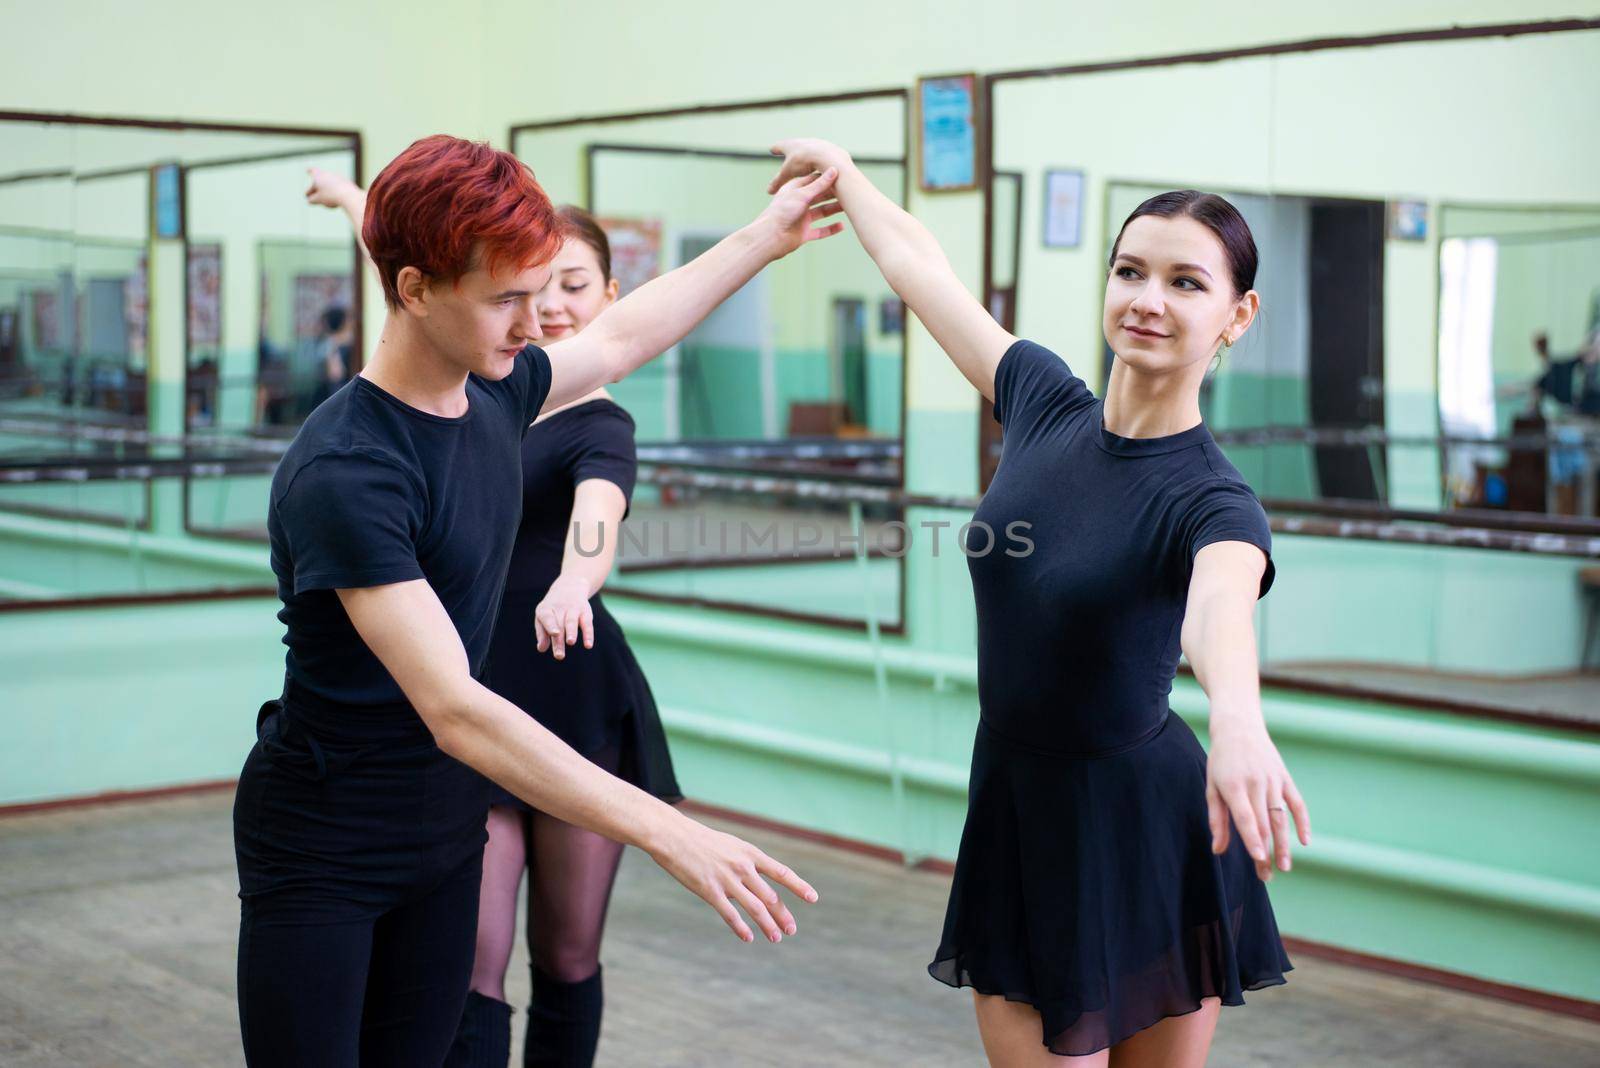 Ballet dancers are doing exercises with their teacher by VitaliiPetrushenko